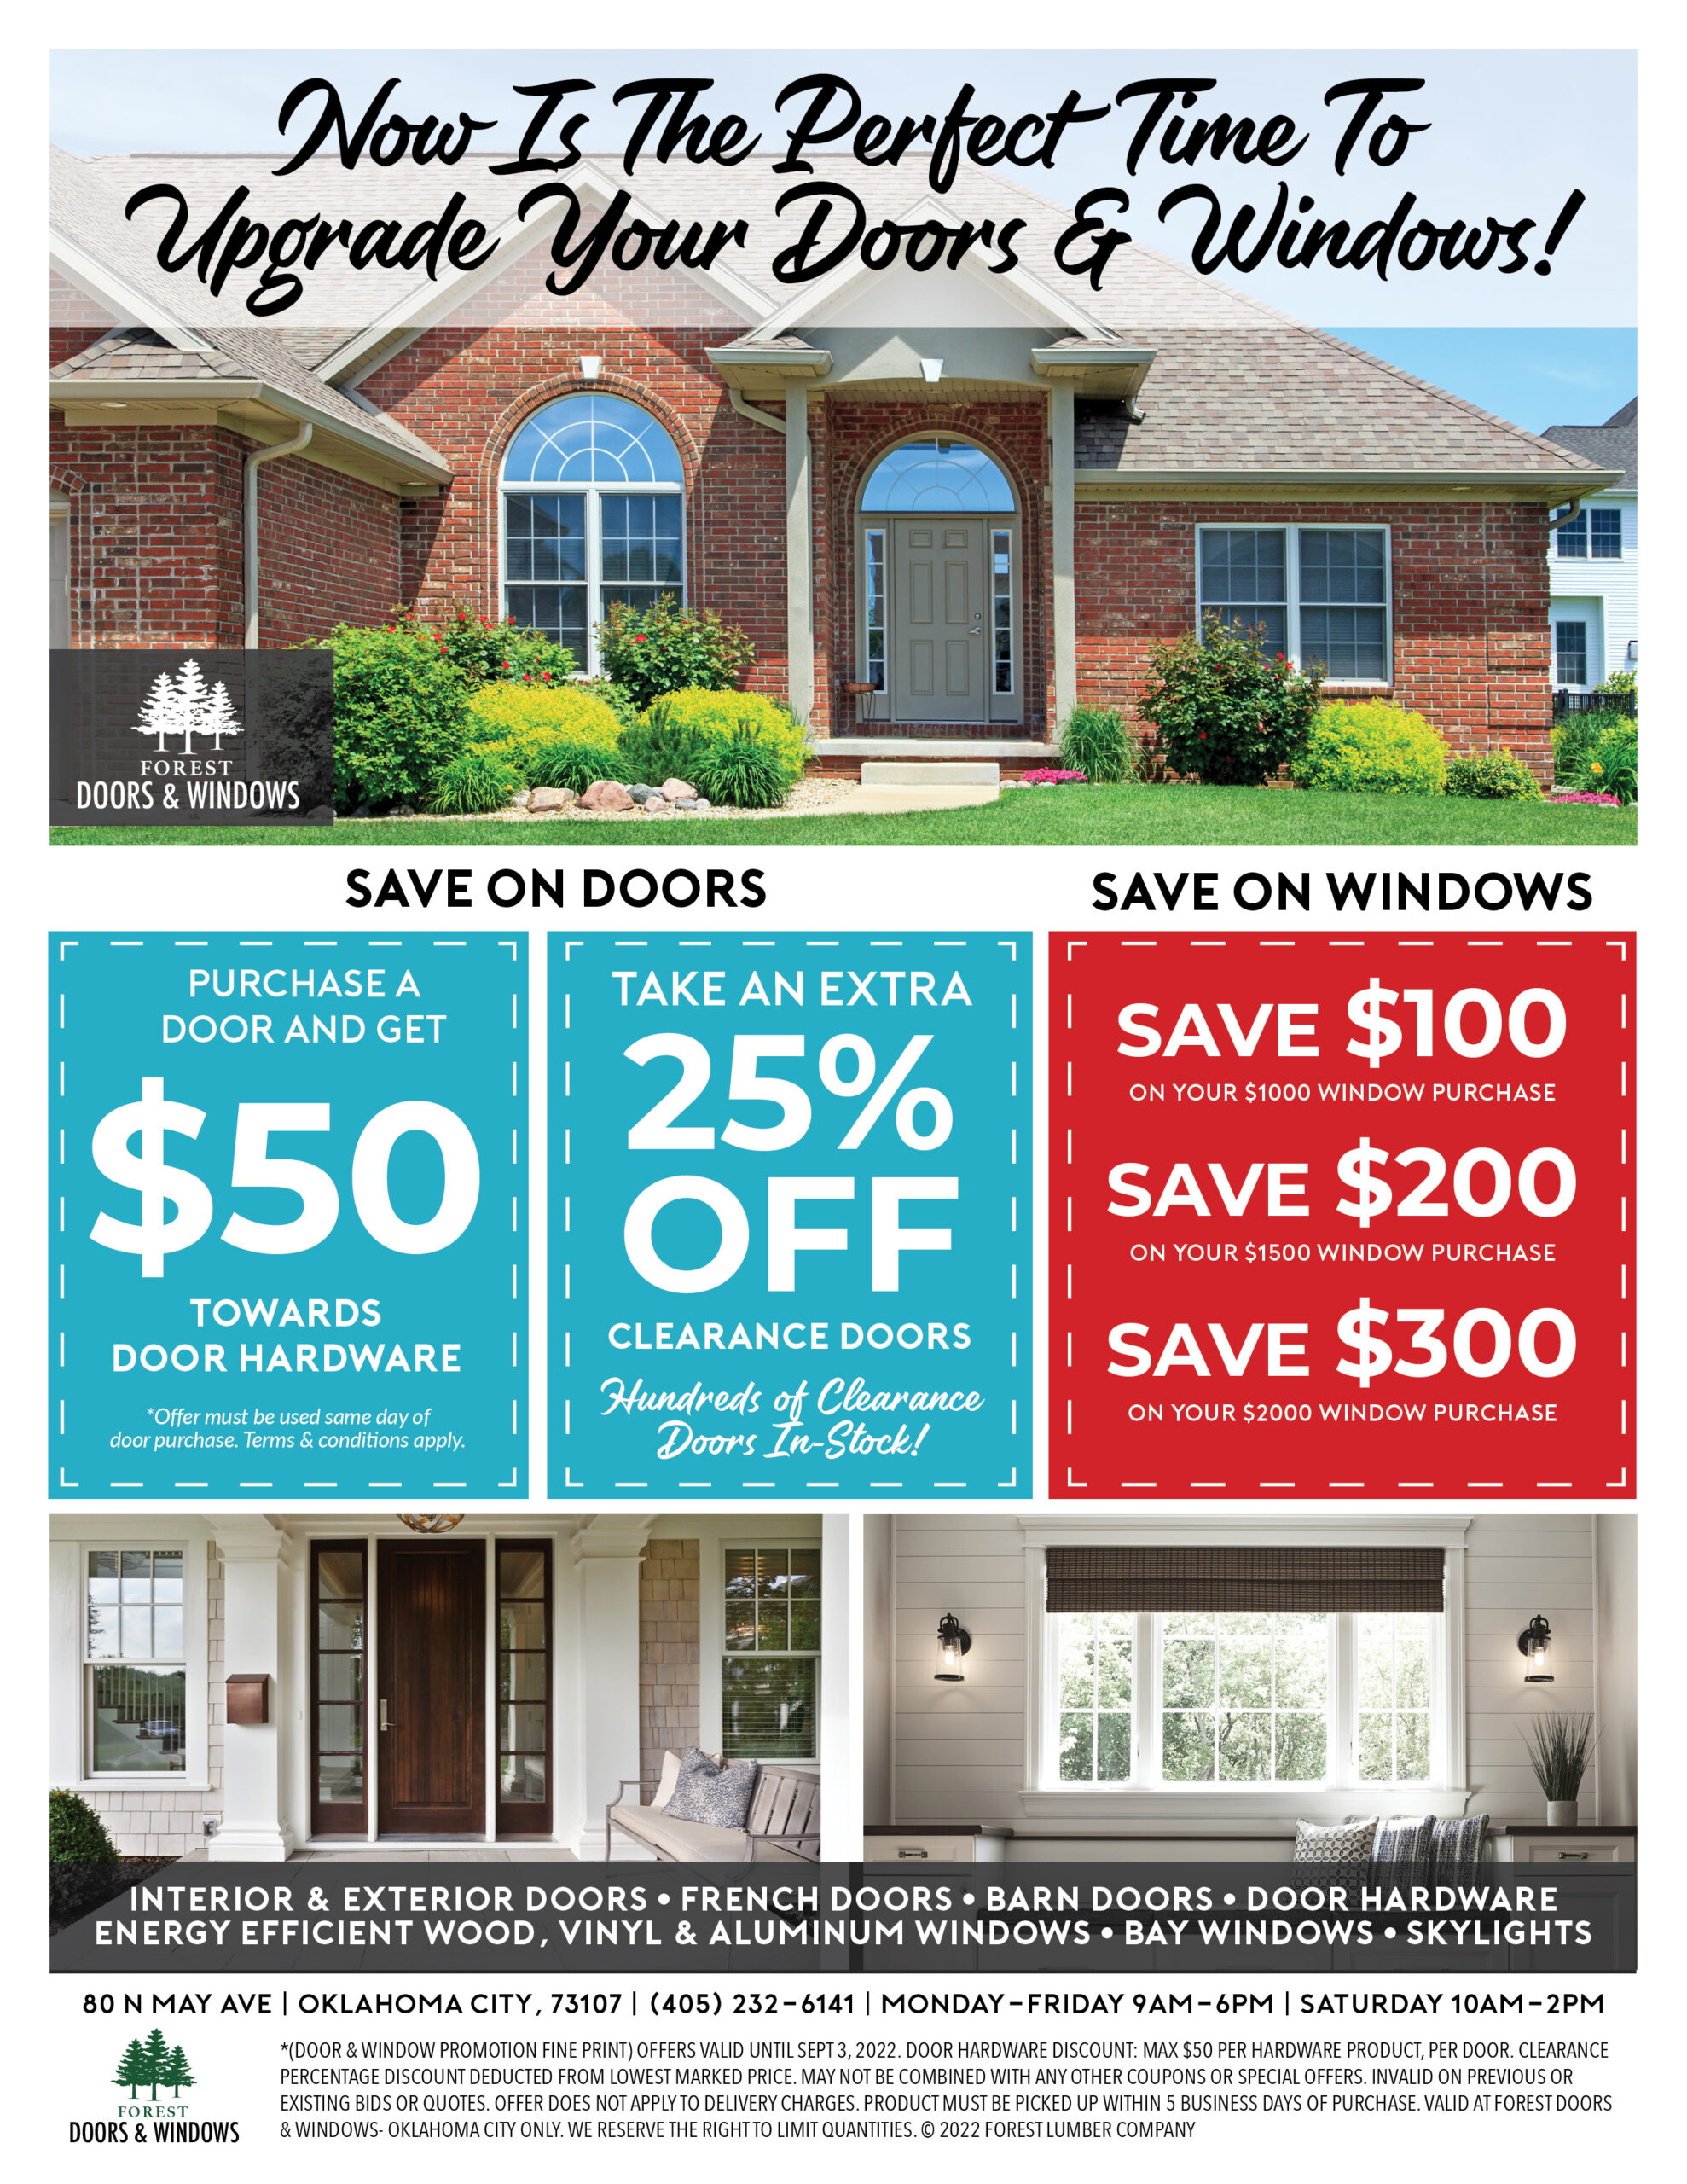 Save On New Doors & Windows For Your Home!